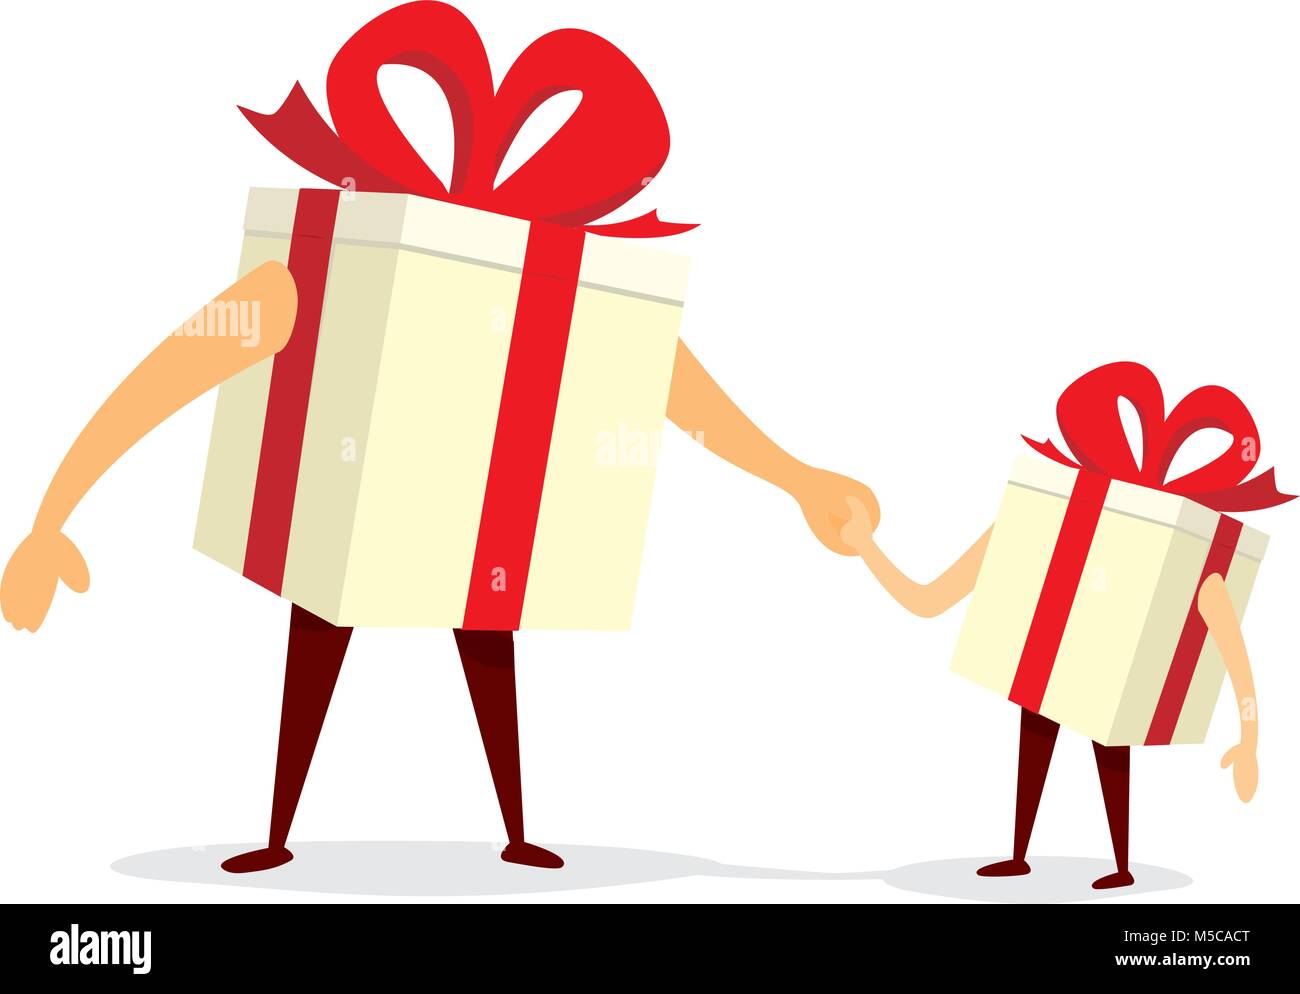 Cartoon illustration of father gift holding hands with son Stock Vector